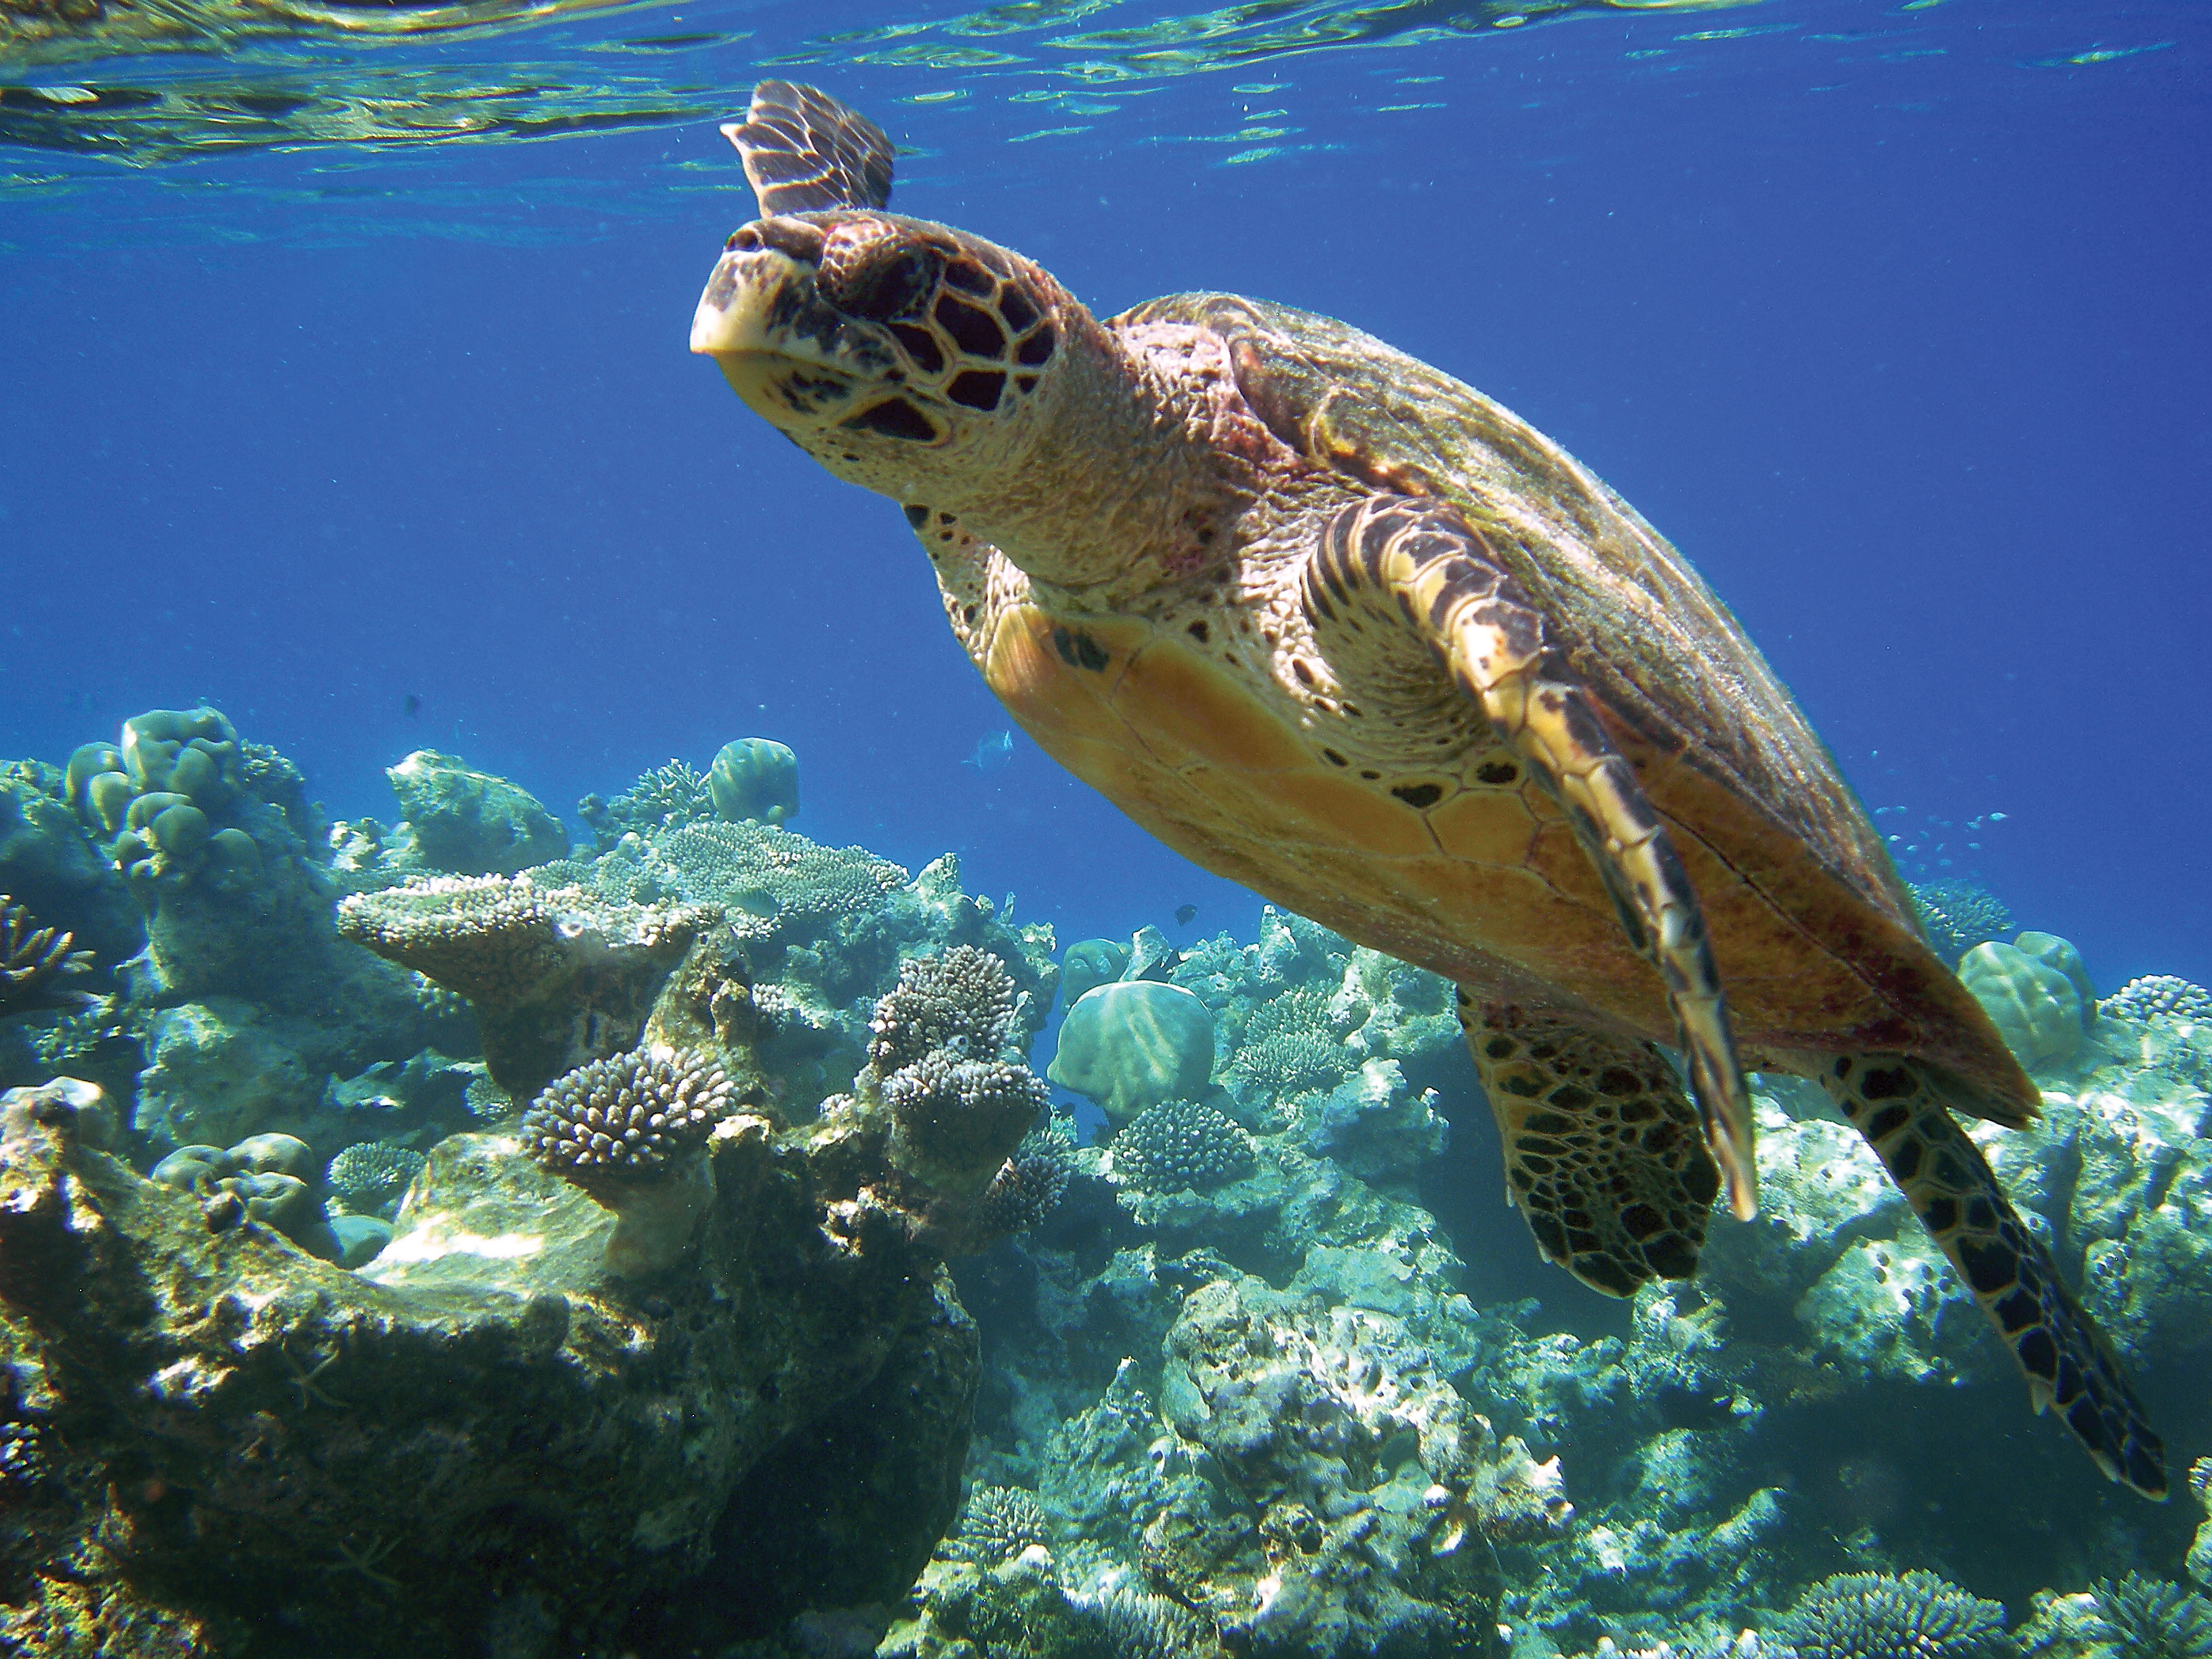 A hawskbill turtle, shown swimming just under the ocean's surface, that may outlive many governments in the Americas. (Photo by Neil O'Halloran.)